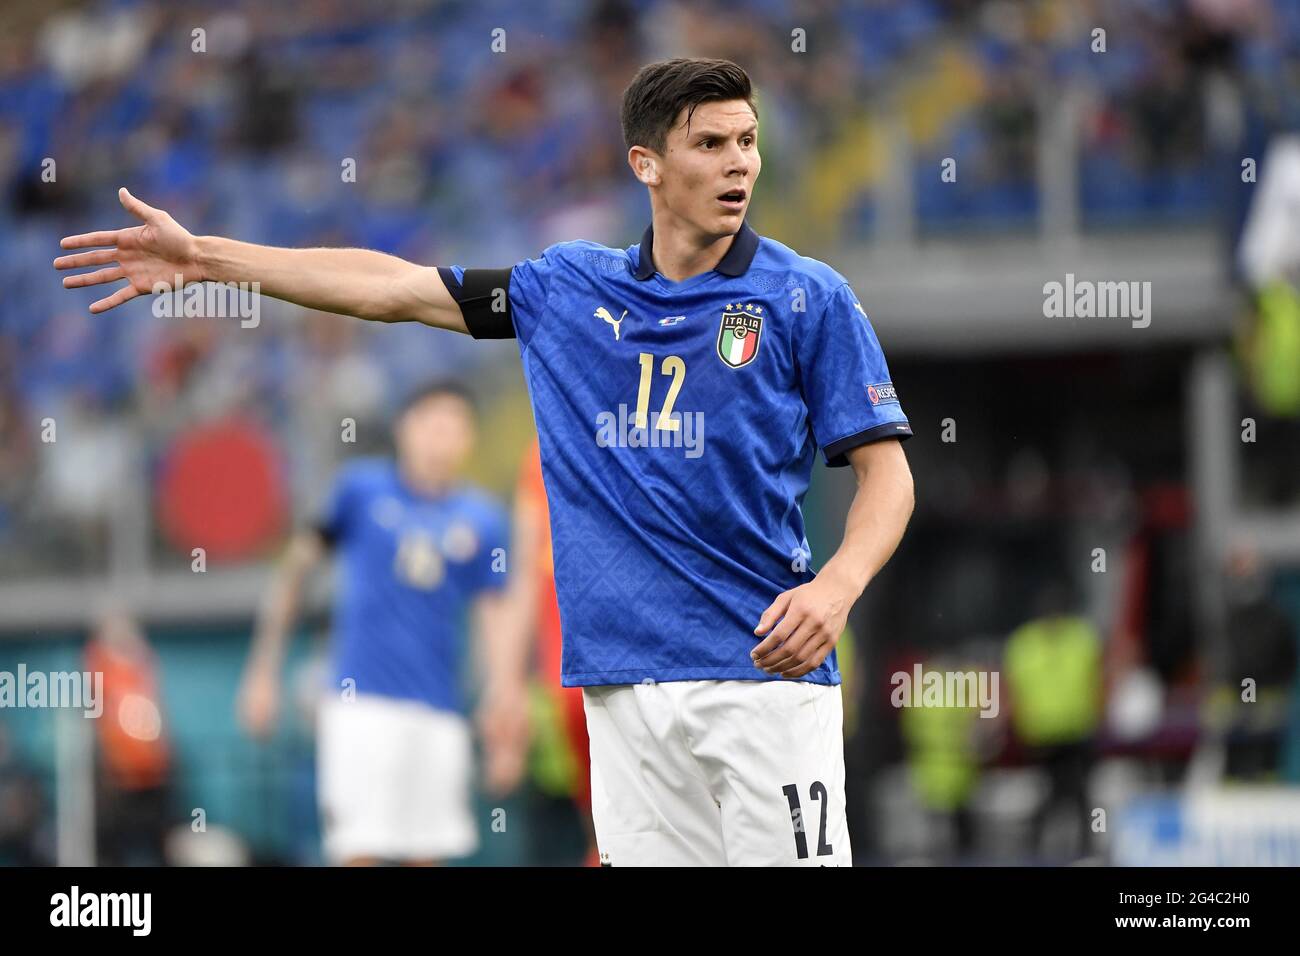 Roma, Italy. 20th June, 2021. Matteo Pessina of Italy reacts during the Uefa Euro 2020 Group A football match between Italy and Wales at stadio Olimpico in Rome (Italy), June 20th, 2021. Photo Andrea Staccioli/Insidefoto Credit: insidefoto srl/Alamy Live News Stock Photo